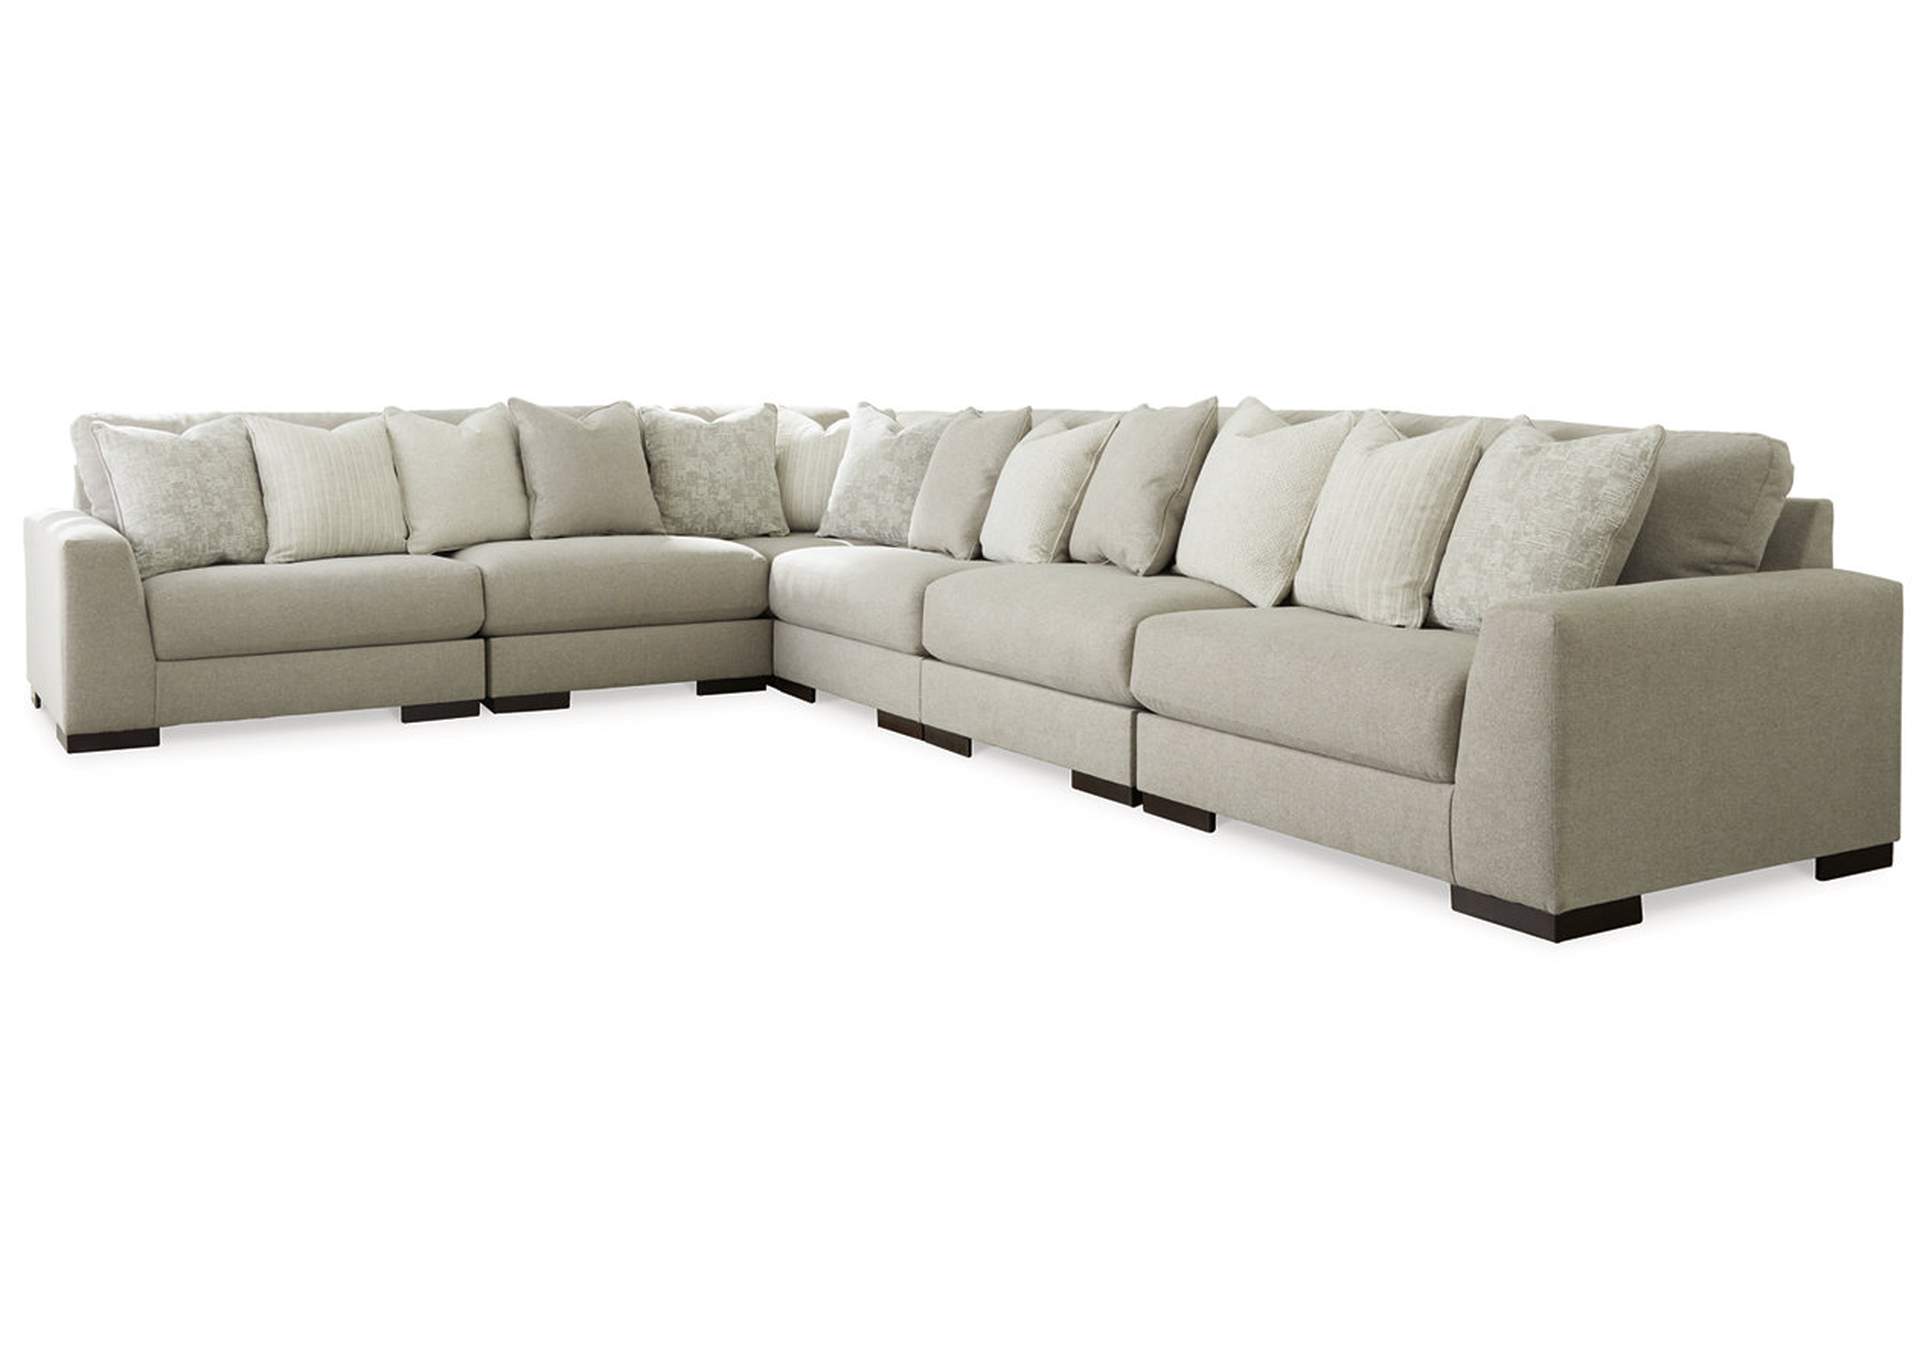 Lyndeboro 6-Piece Sectional with Ottoman,Ashley